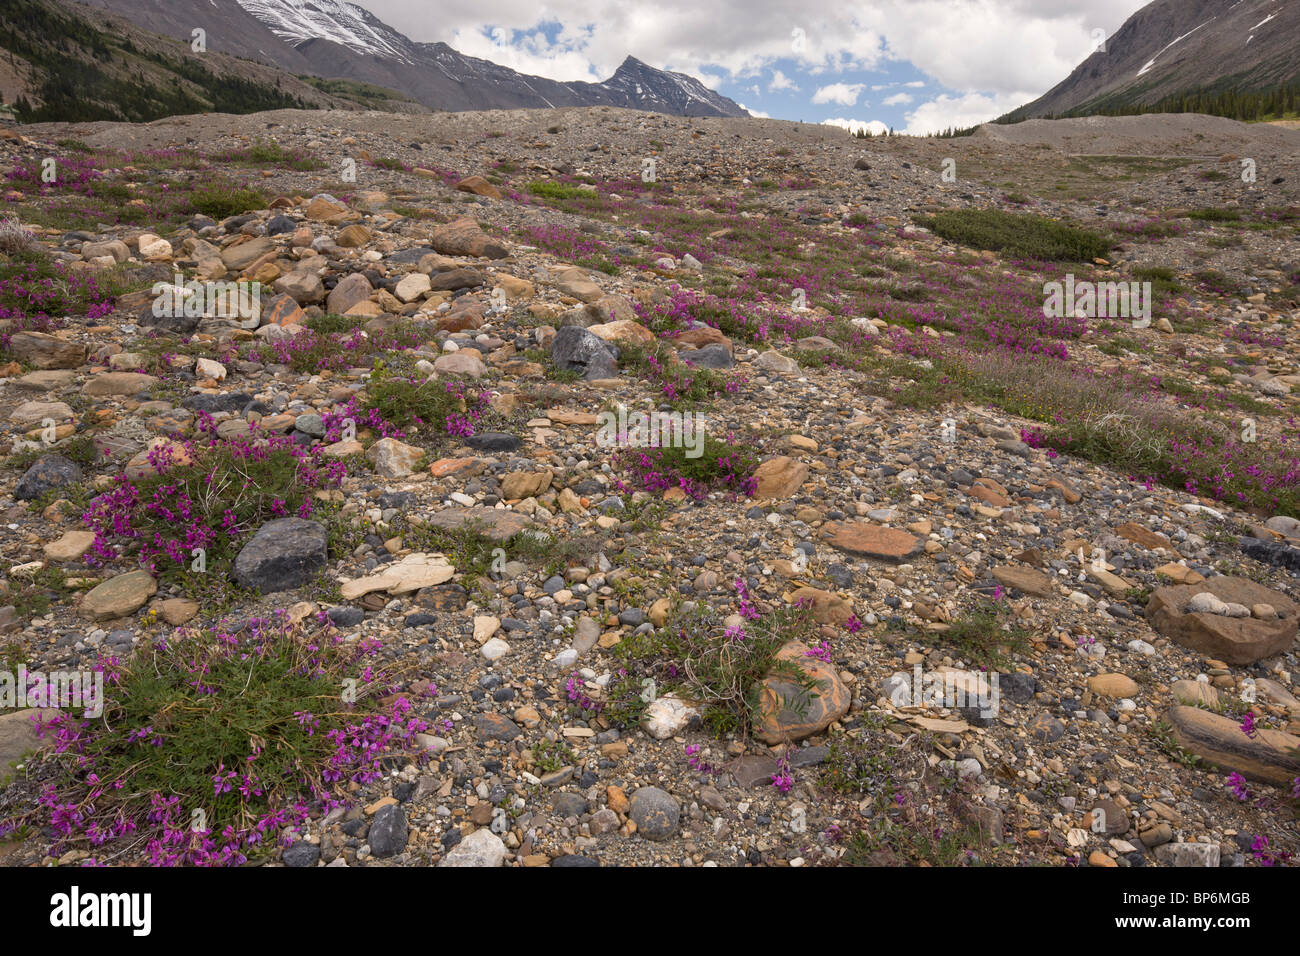 Northern Sweet Vetch, Hedysarum boreale, growing in abundance on glacial morraine of Athabasca Glacier; Columbia icefield Canada Stock Photo